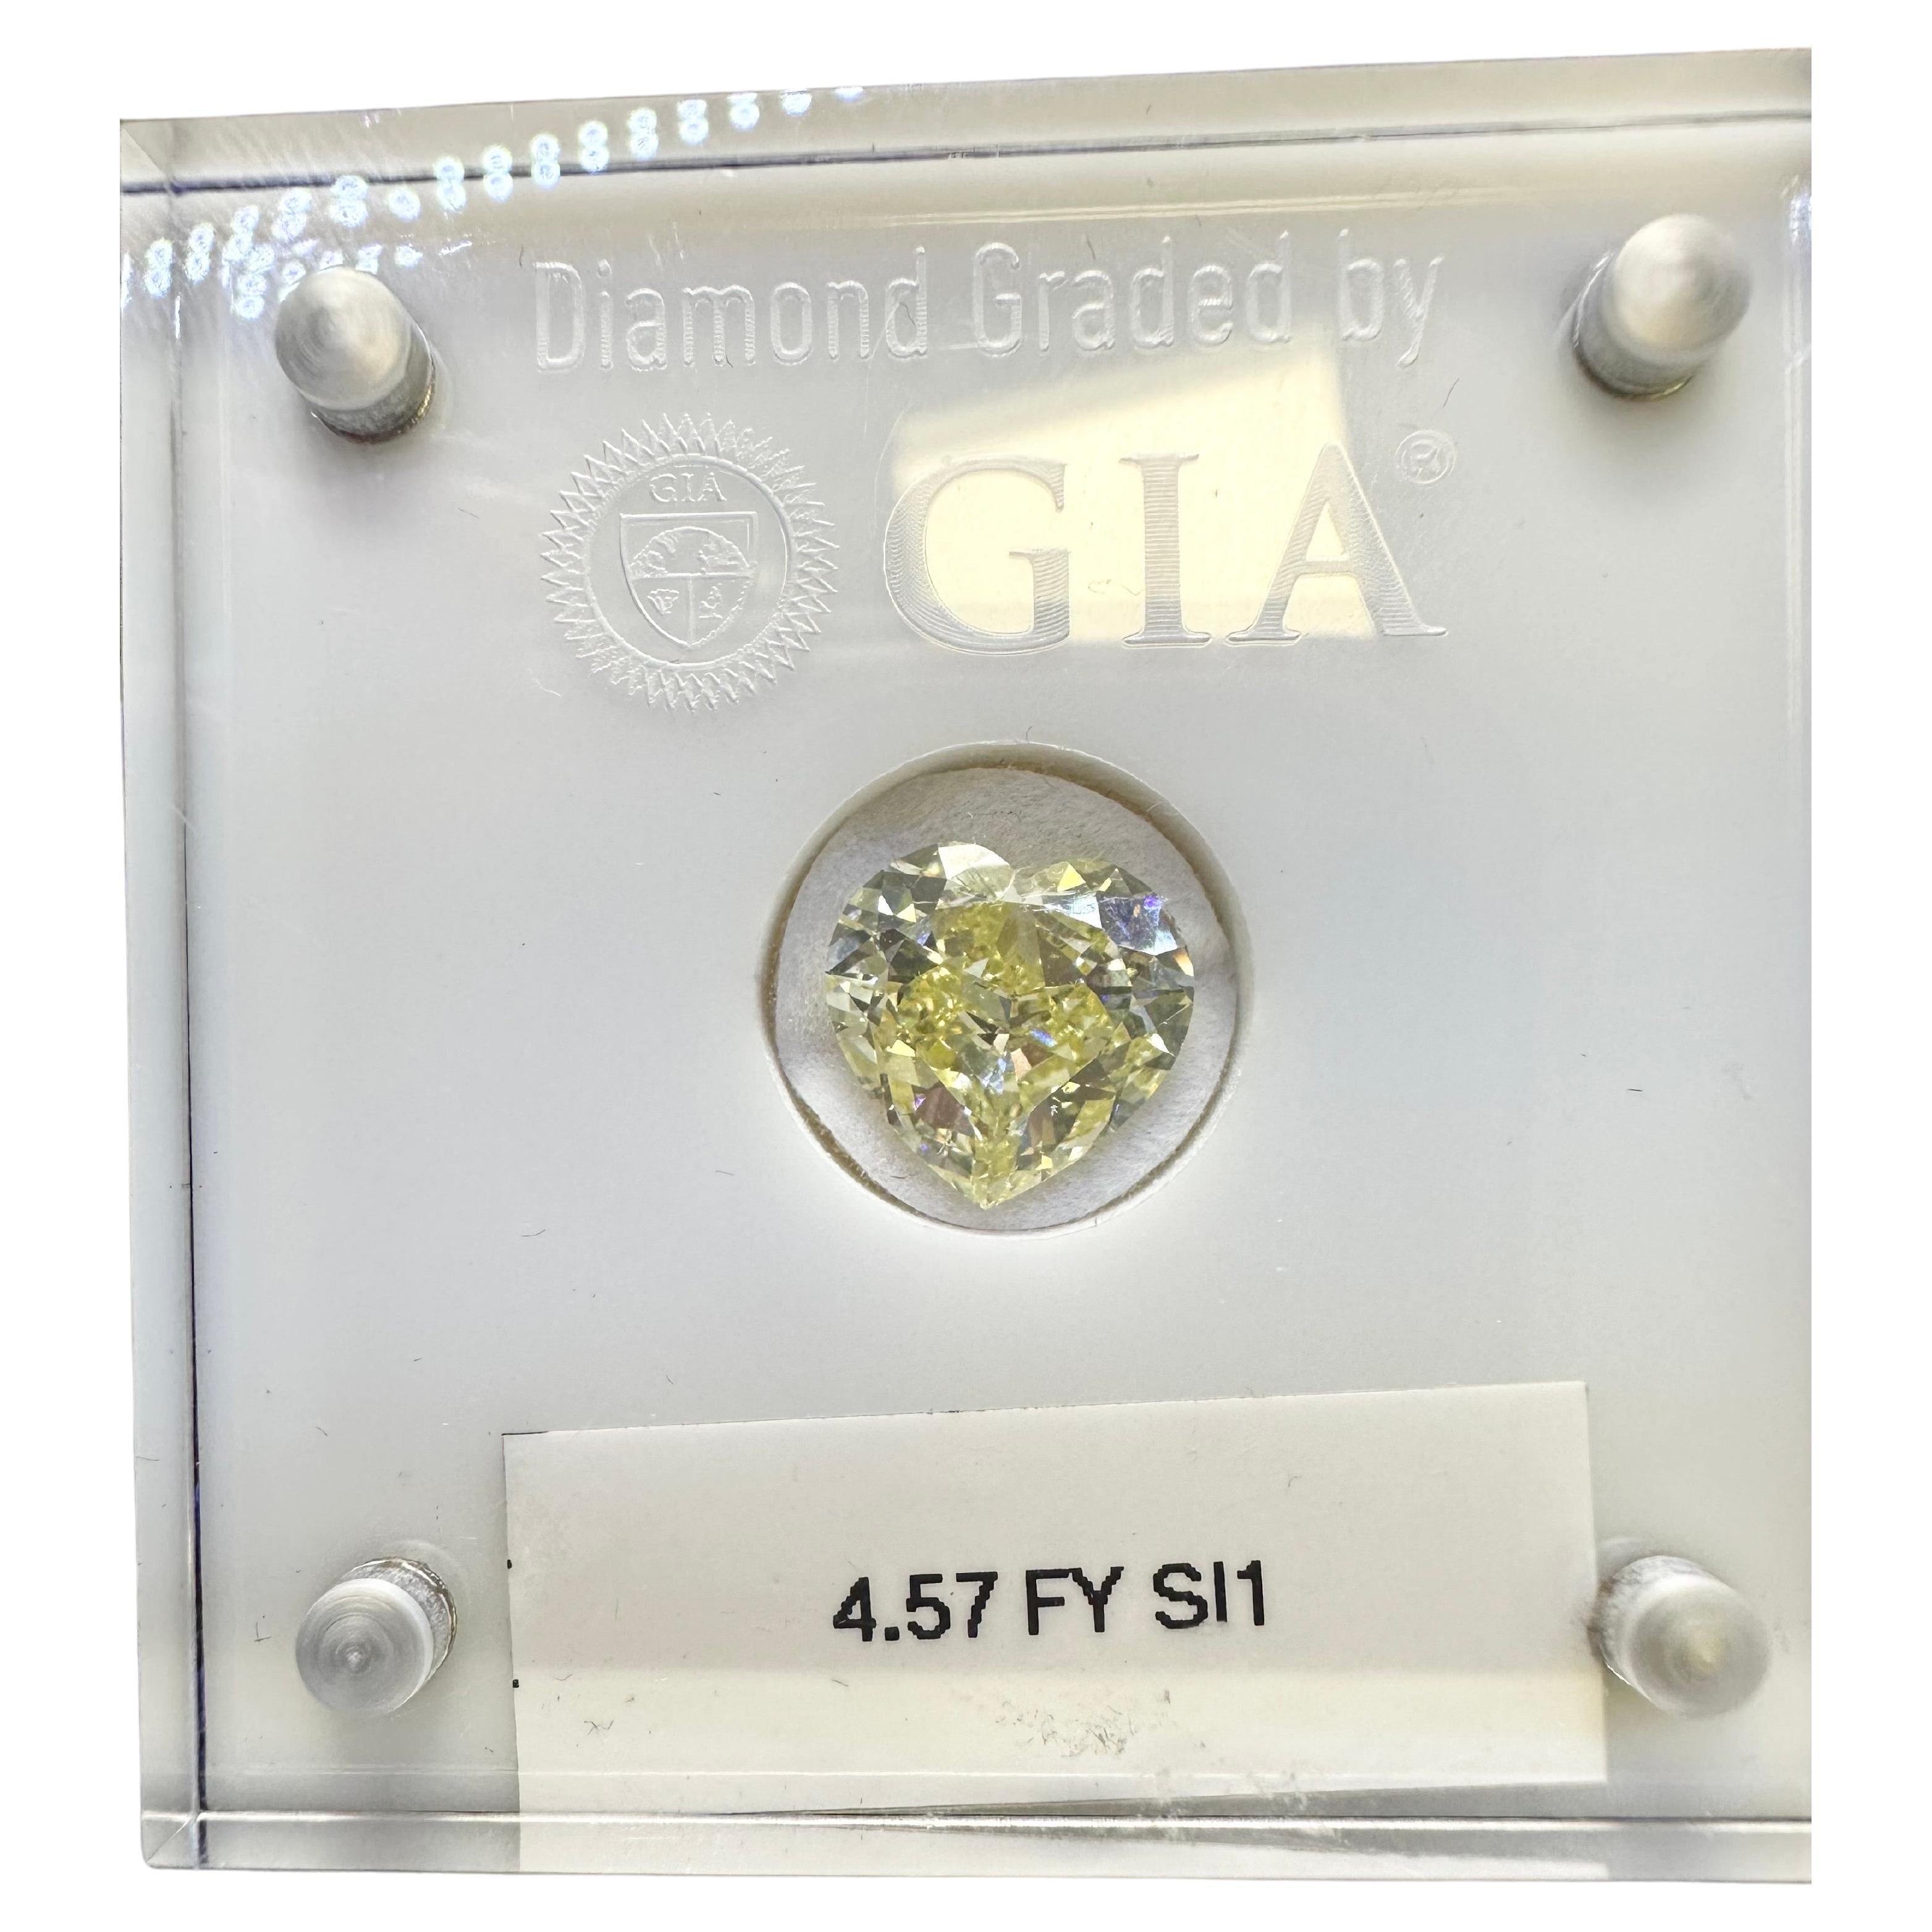 GIA certified diamond, stunning heart brilliant 4.57 carats!

Natural Diamond:
Color: Fancy Yellow
Cut: Heart Brilliant
Carat: 4.57ct
Clarity: SI1
Item: T42000
Certificate of authenticity comes with purchase

ABOUT US
We are a family-owned business.